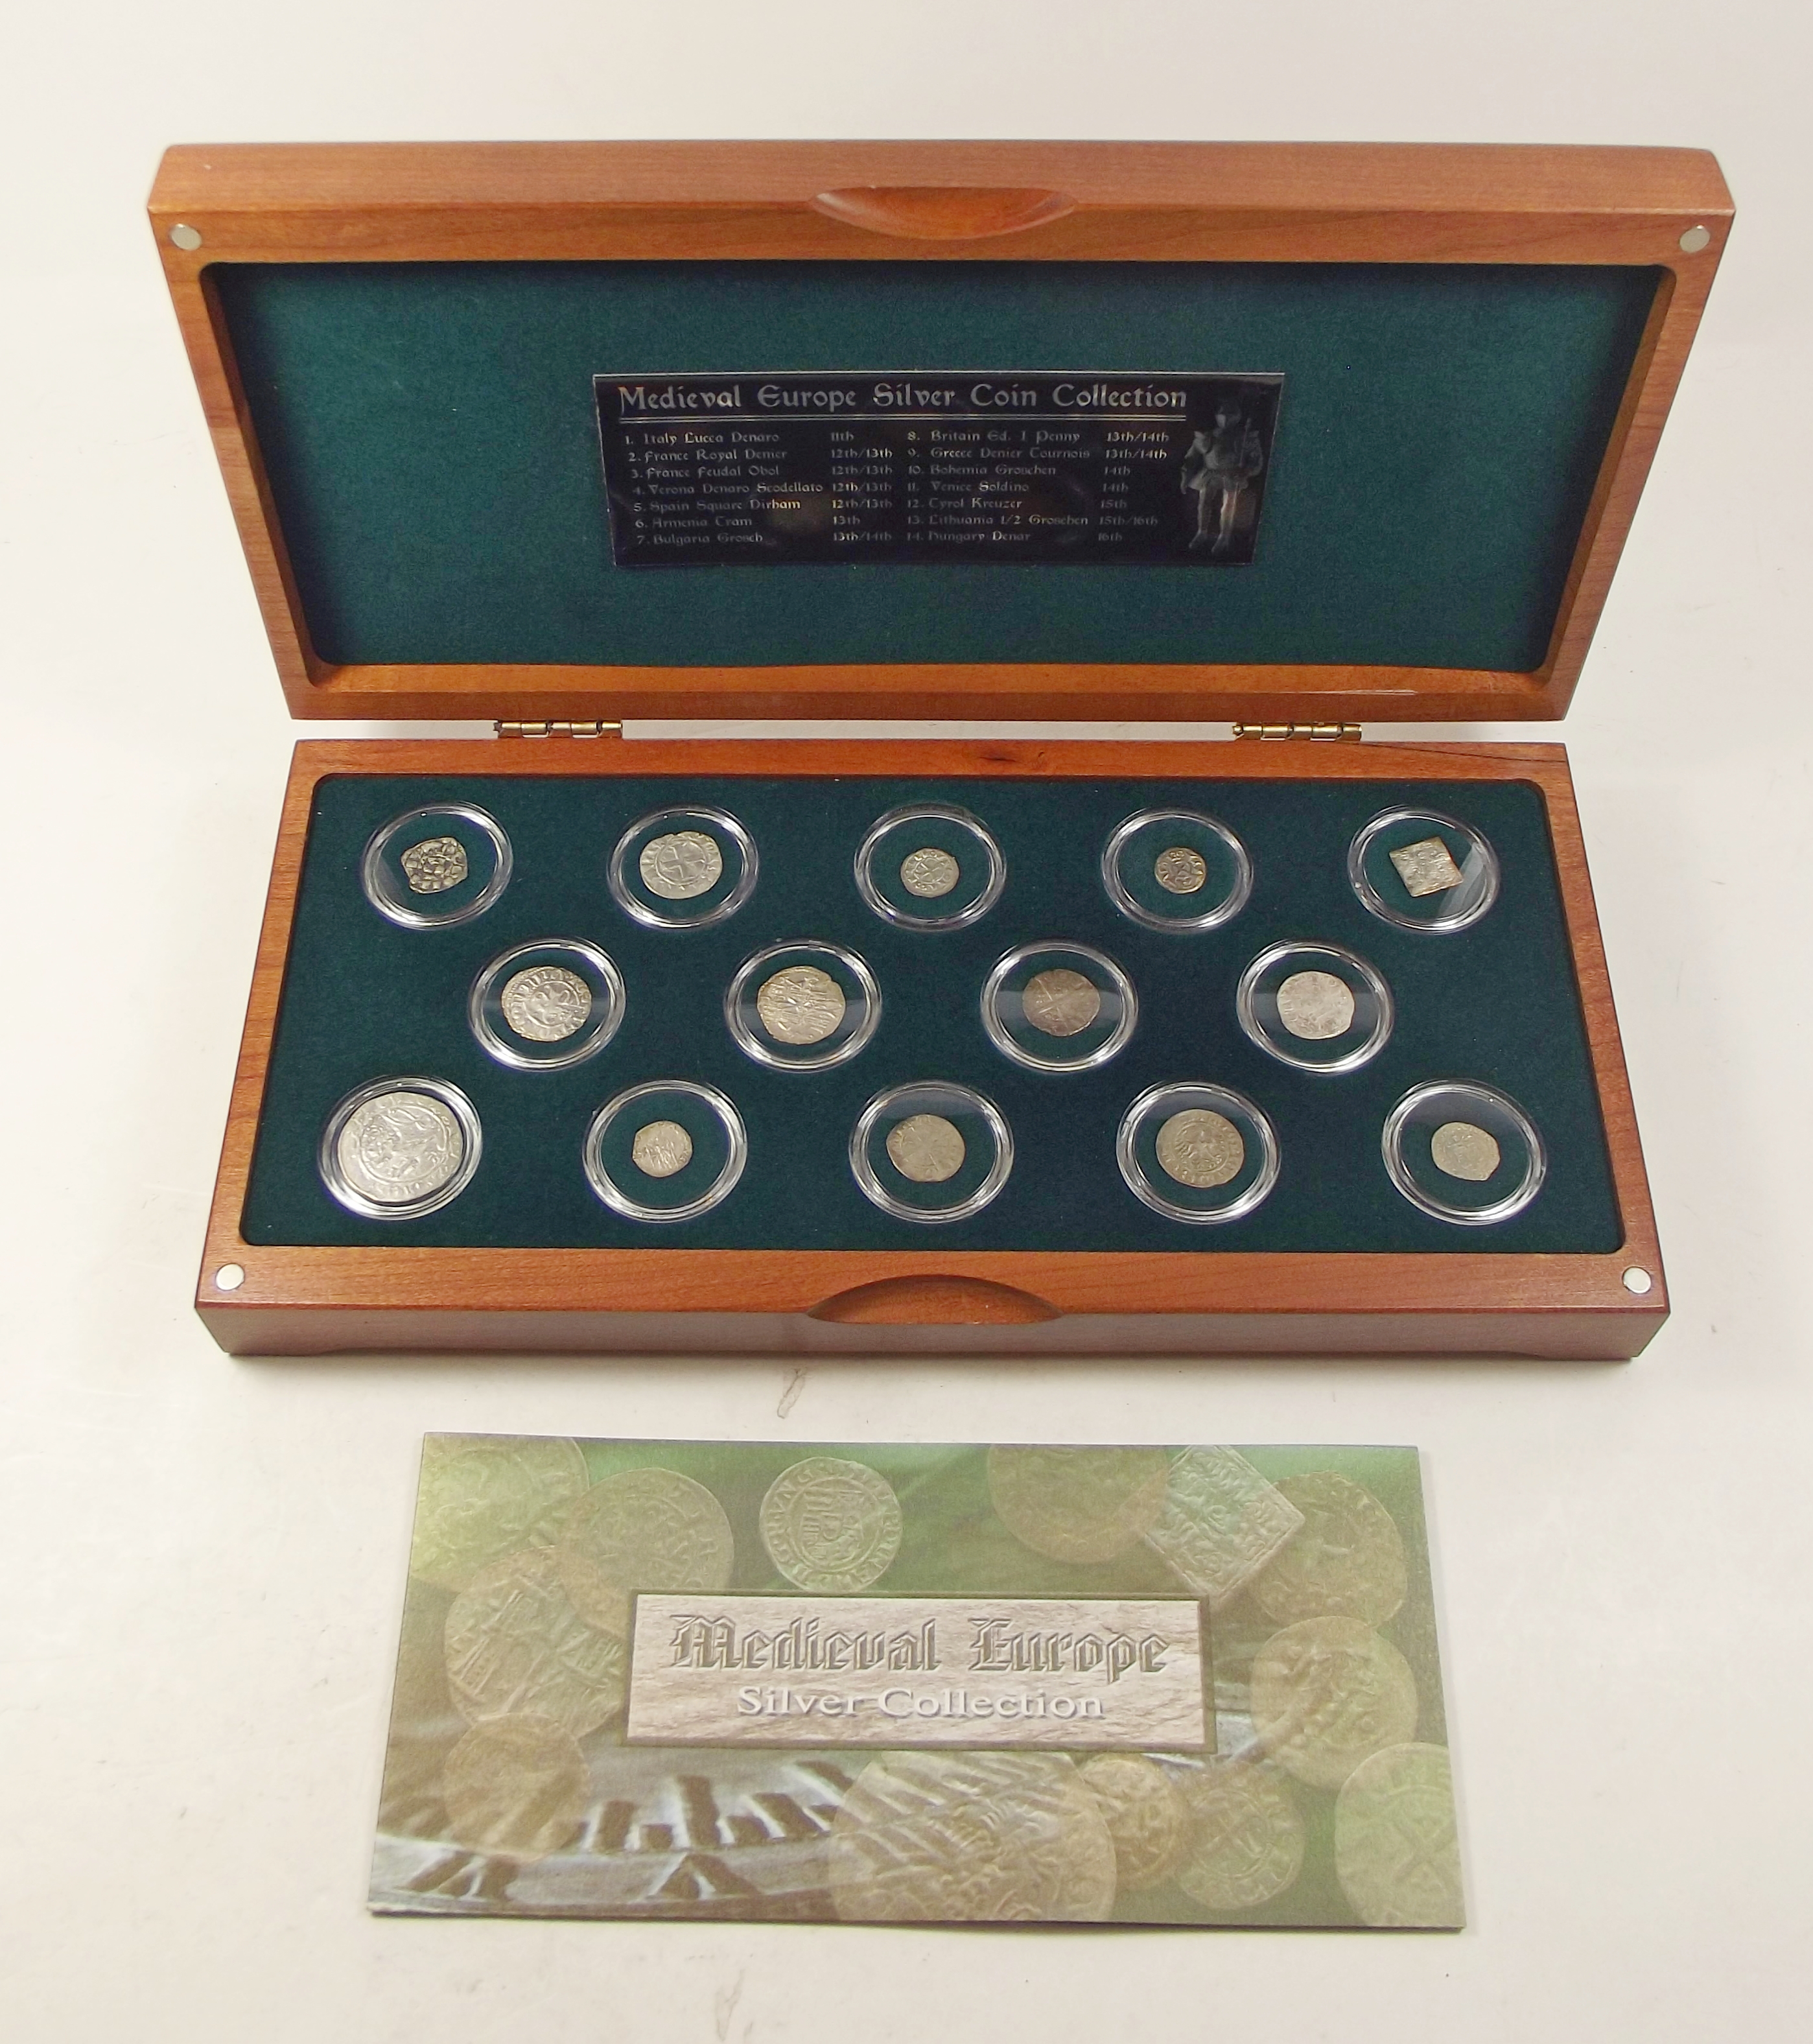 Royal Mint Issue: Medieval Europe silver Coin Collection 11th-16th century. Comprising examples